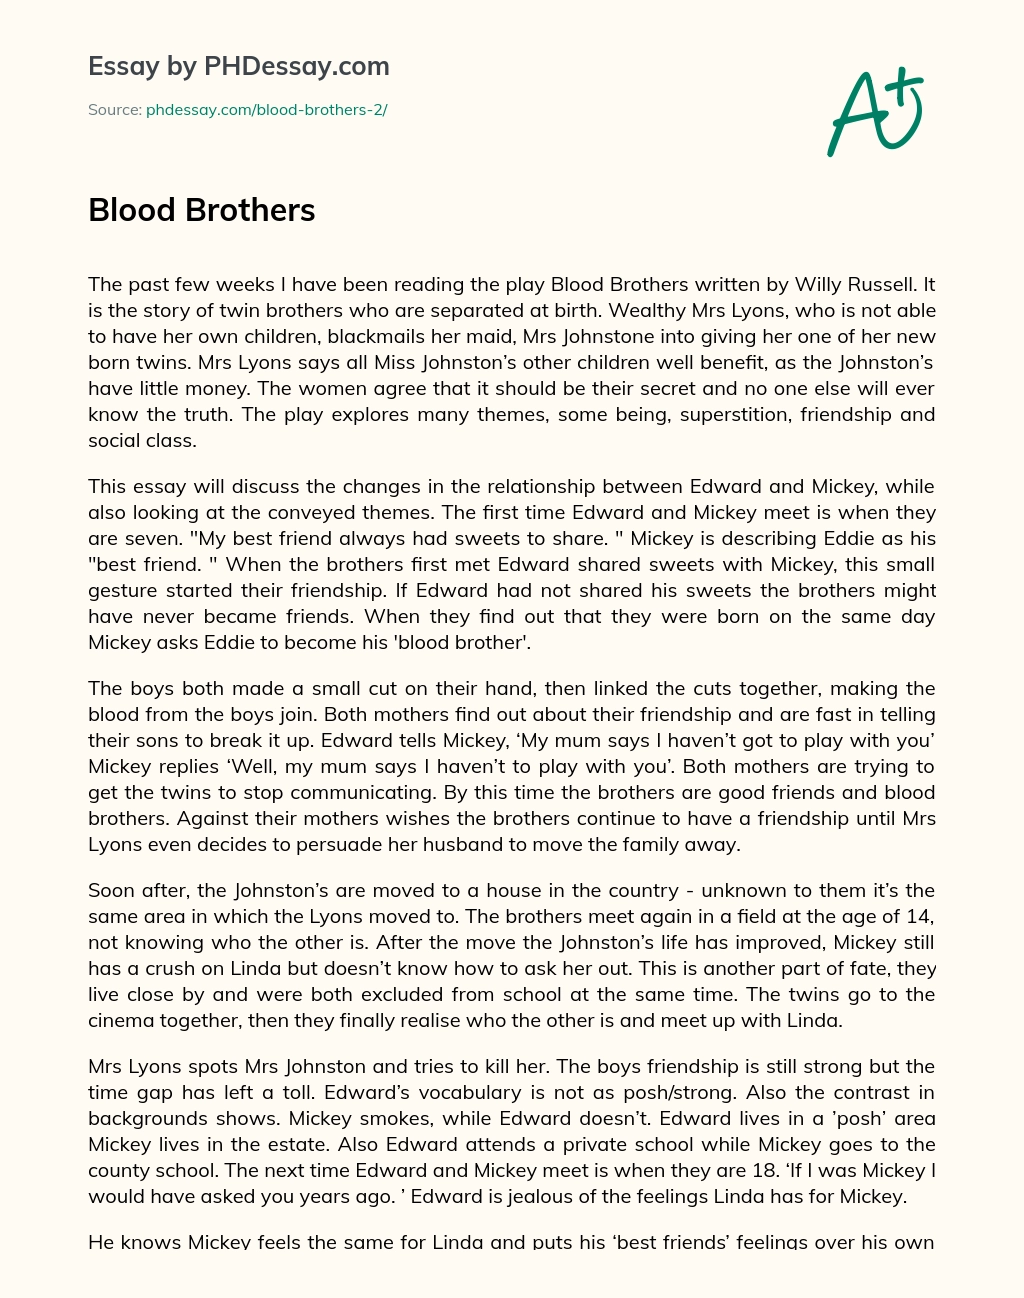 Blood Brothers essay